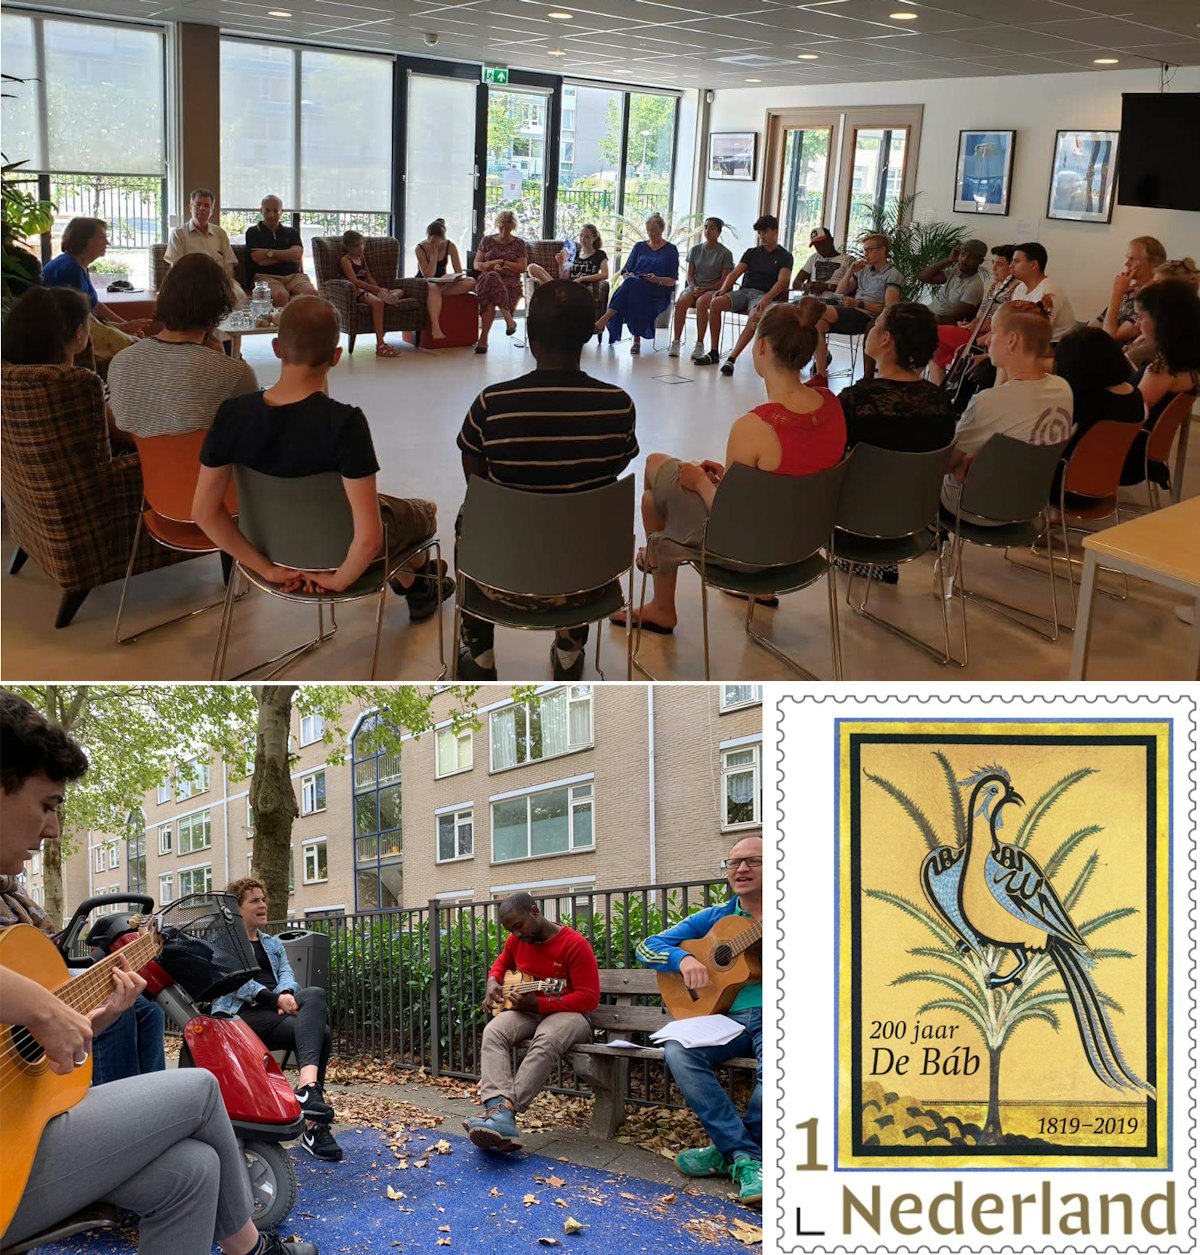 Around the Netherlands, communities have been engaged in a summer of service to prepare for the bicentenary. Much of the activity has been around involving people of all ages in a dynamic educational process that builds capacity for service aimed at improving their communities materially, socially, and spiritually.